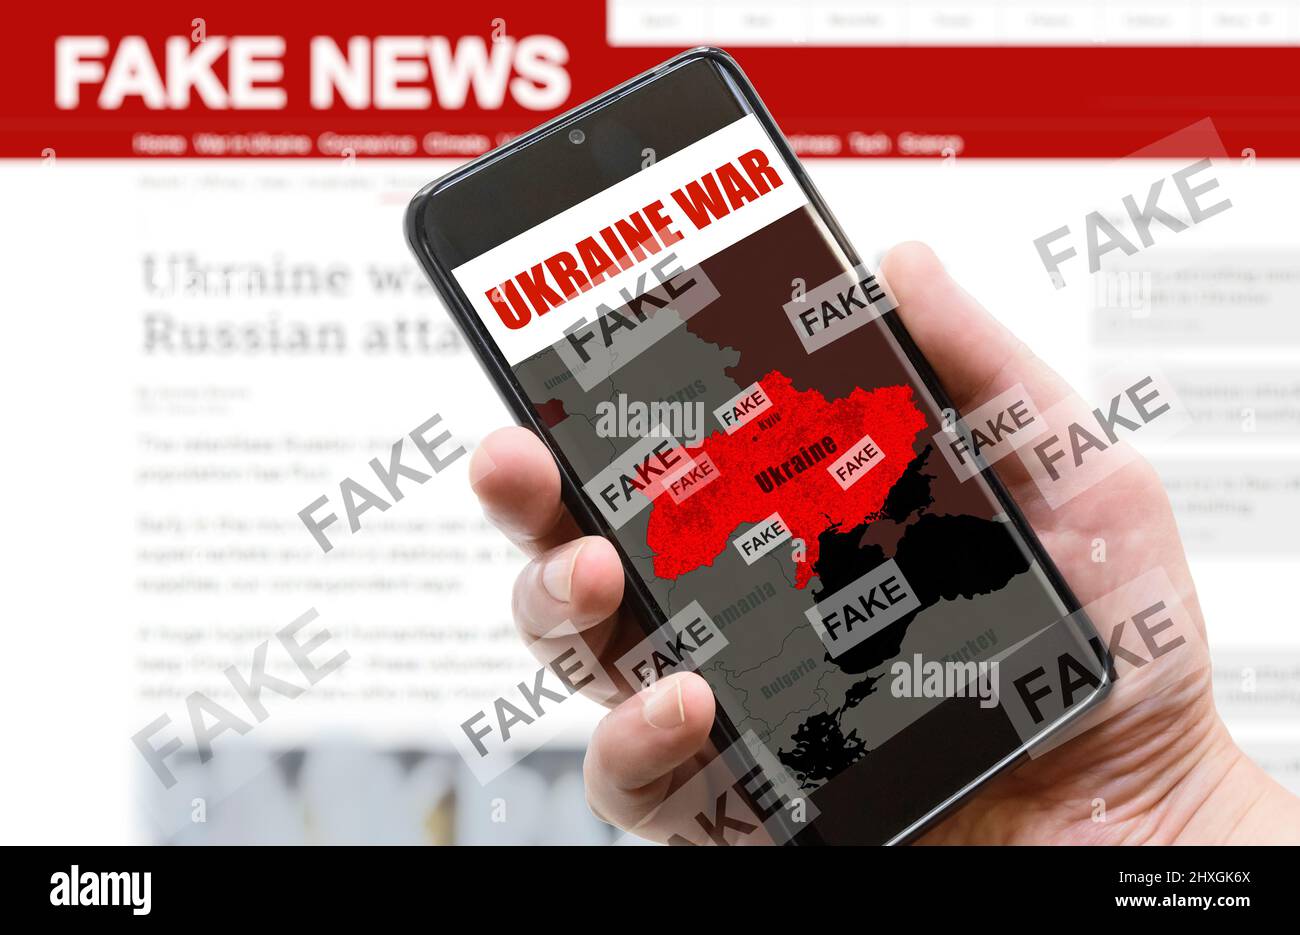 War in Ukraine and Fake News theme, Russia and Ukraine conflict on mobile phone screen. Russia vs Ukraine in media. Concept of politics, communication Stock Photo